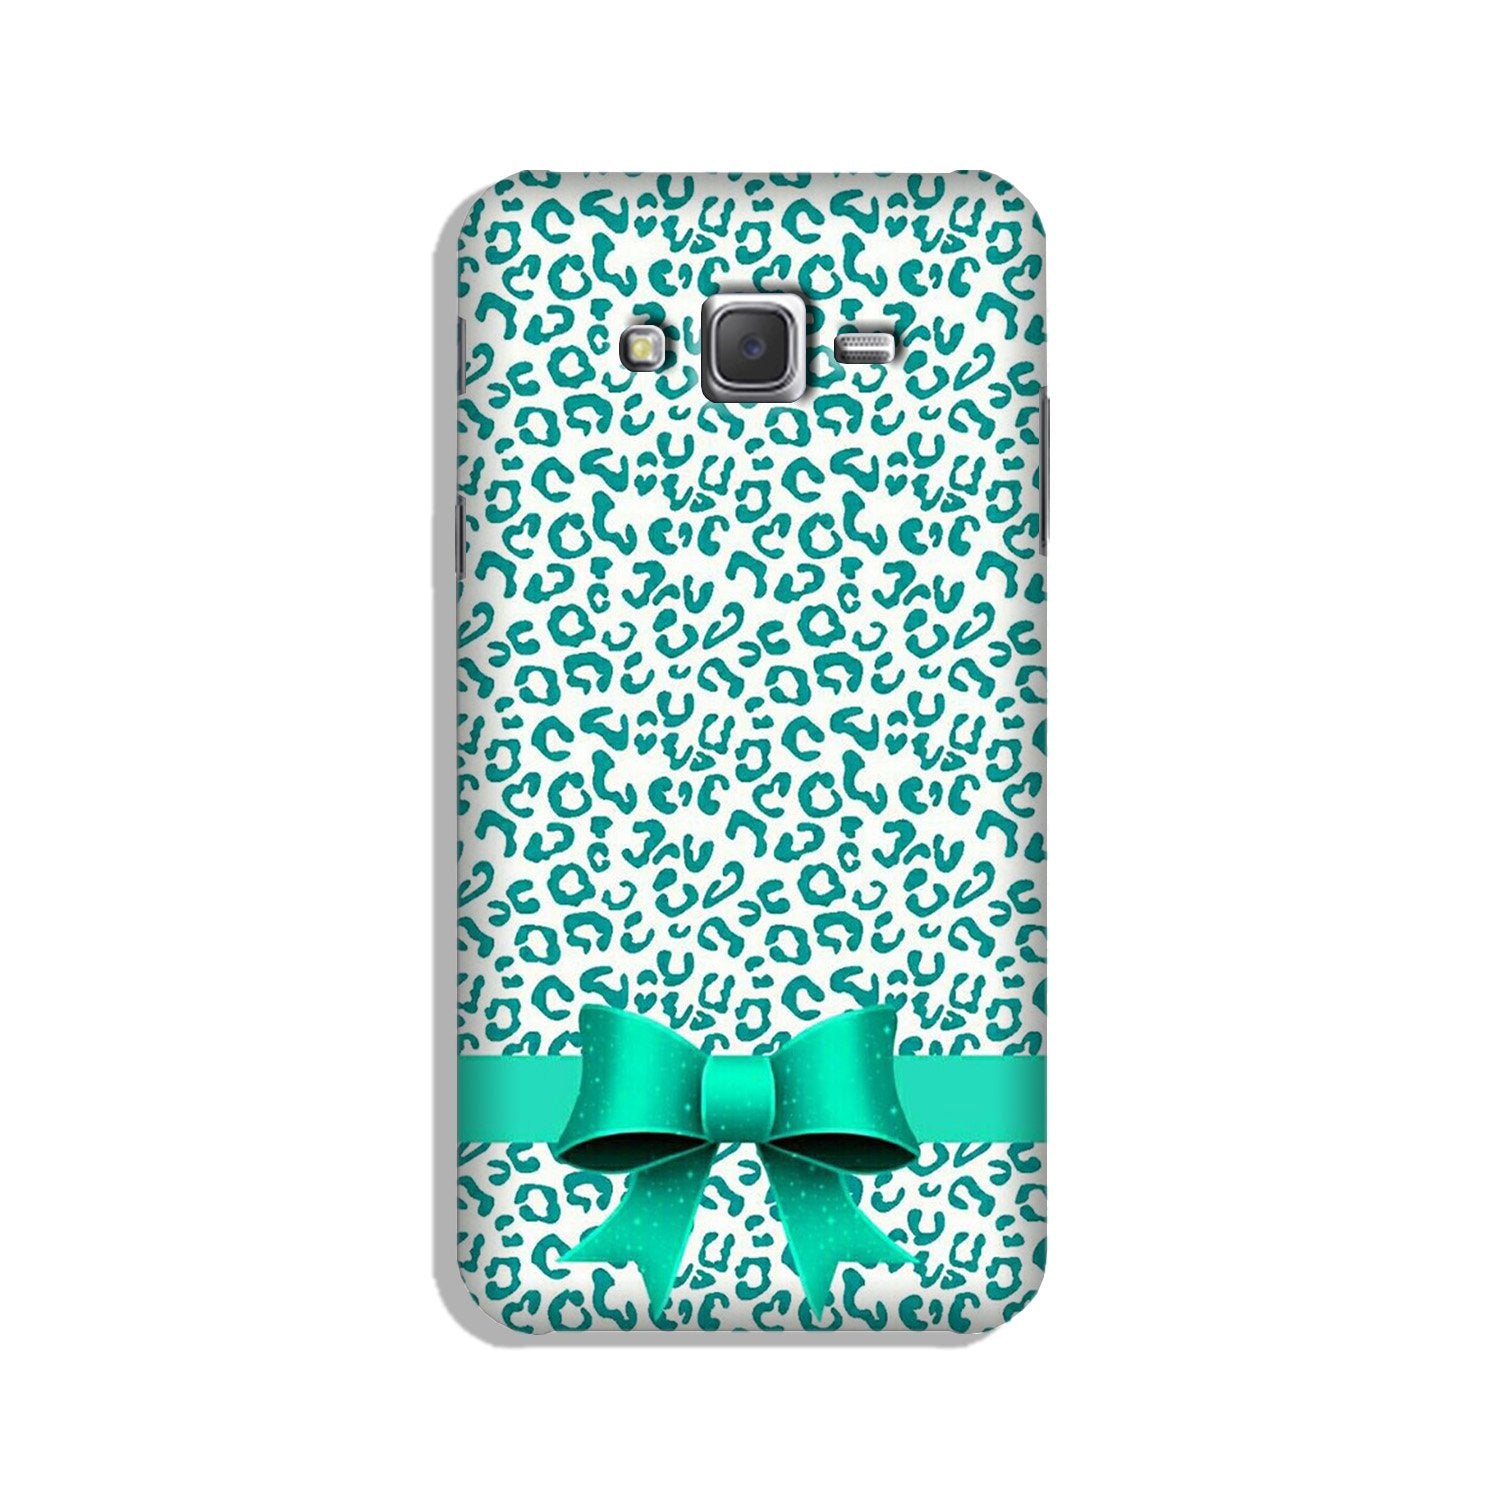 Gift Wrap6 Case for Galaxy J3 (2015)